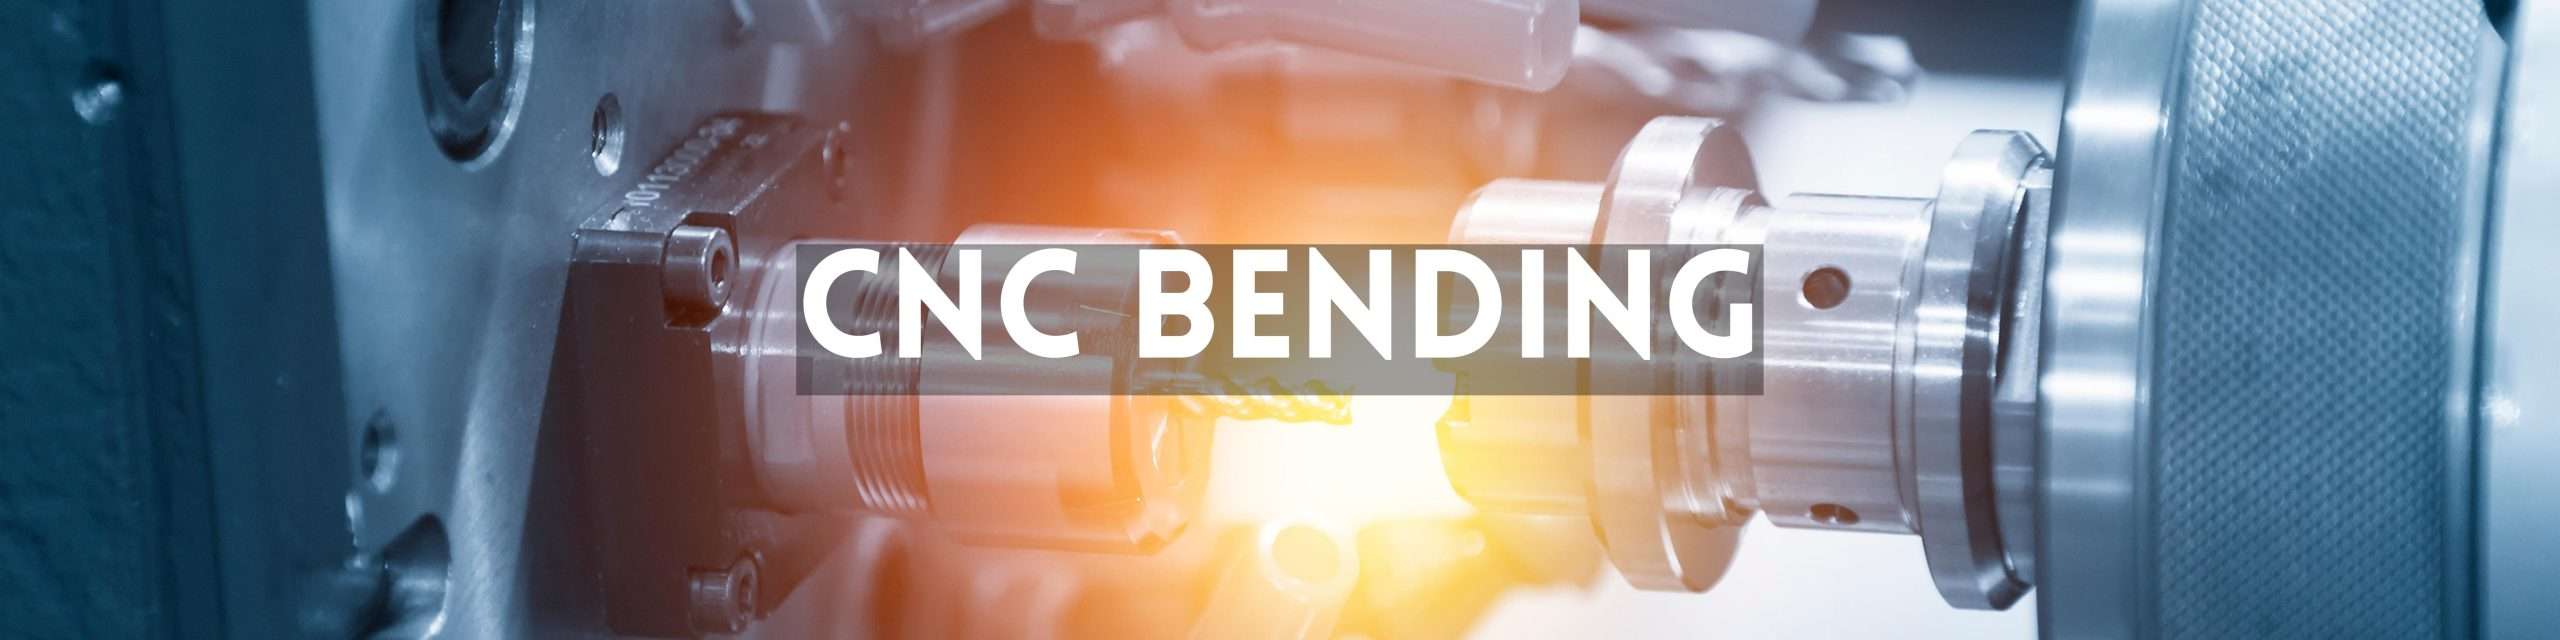 CNC Bending Machine Services at Best Price in Haryana Company